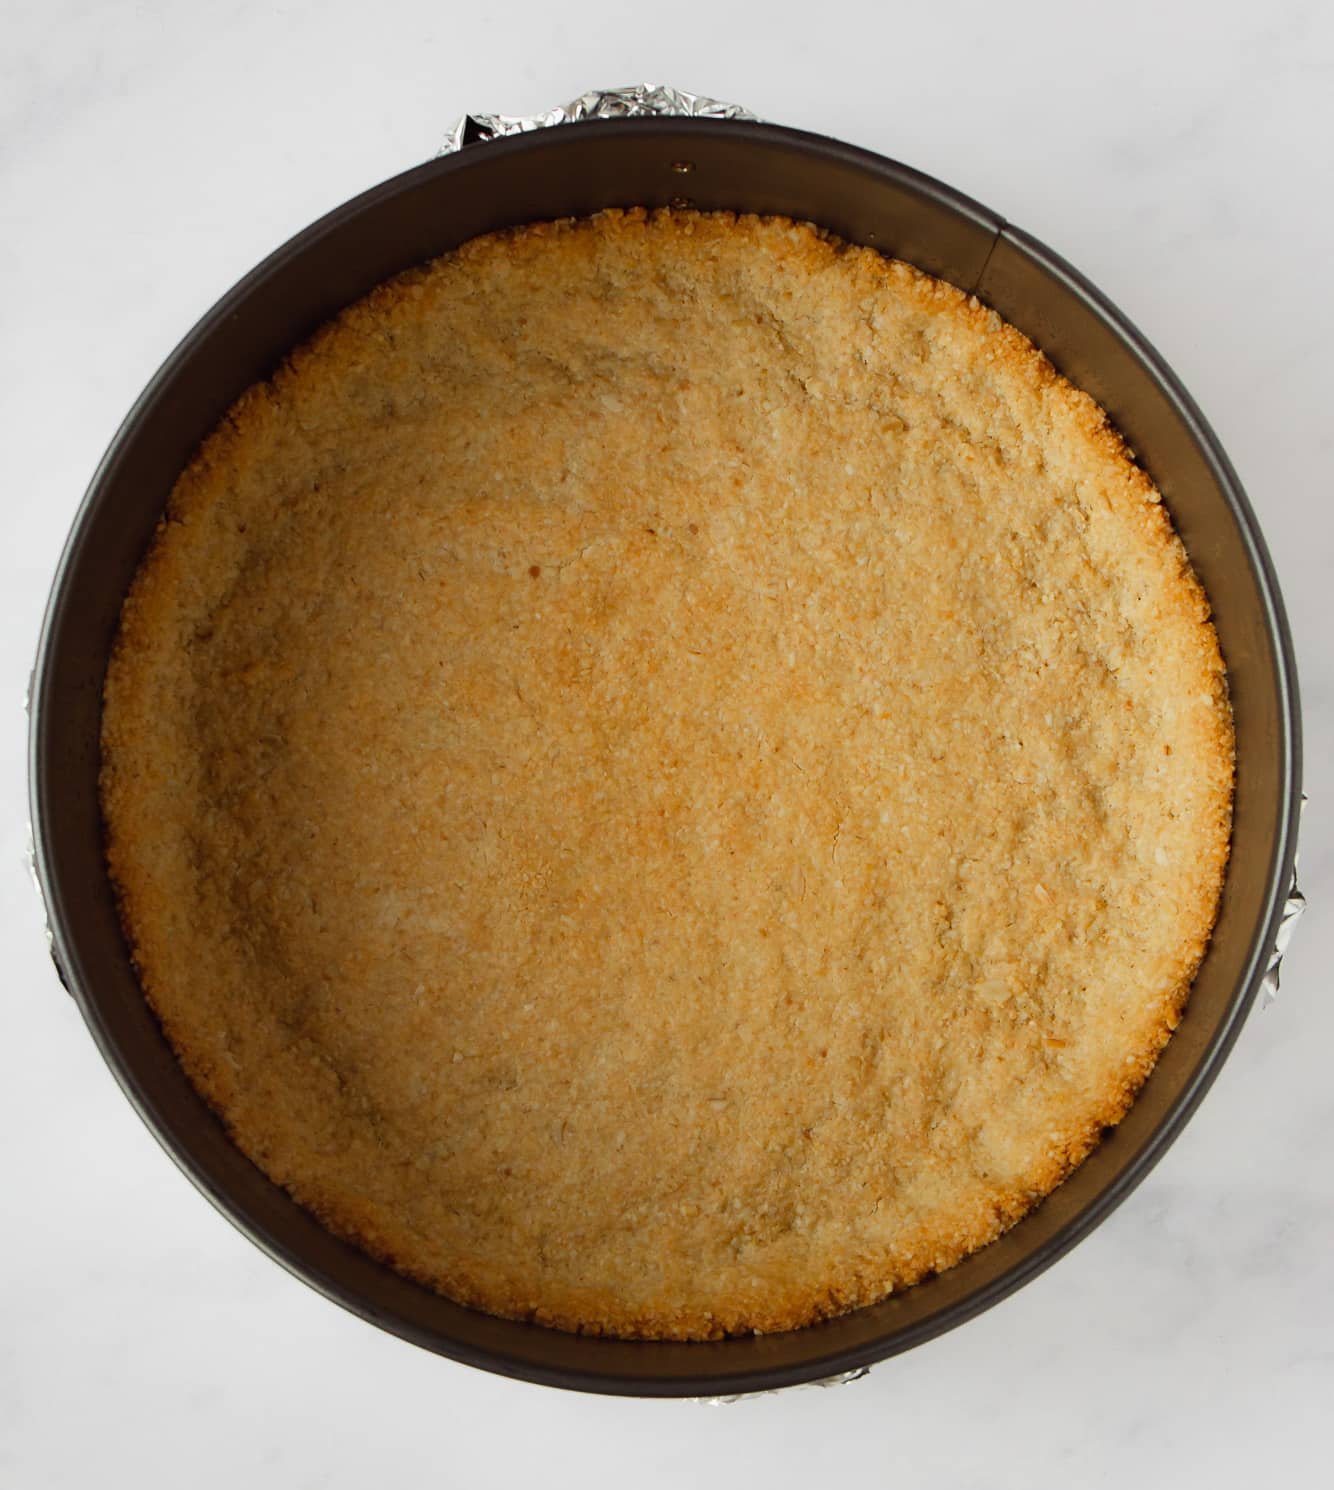 baked almond oat crust in a springform pan.